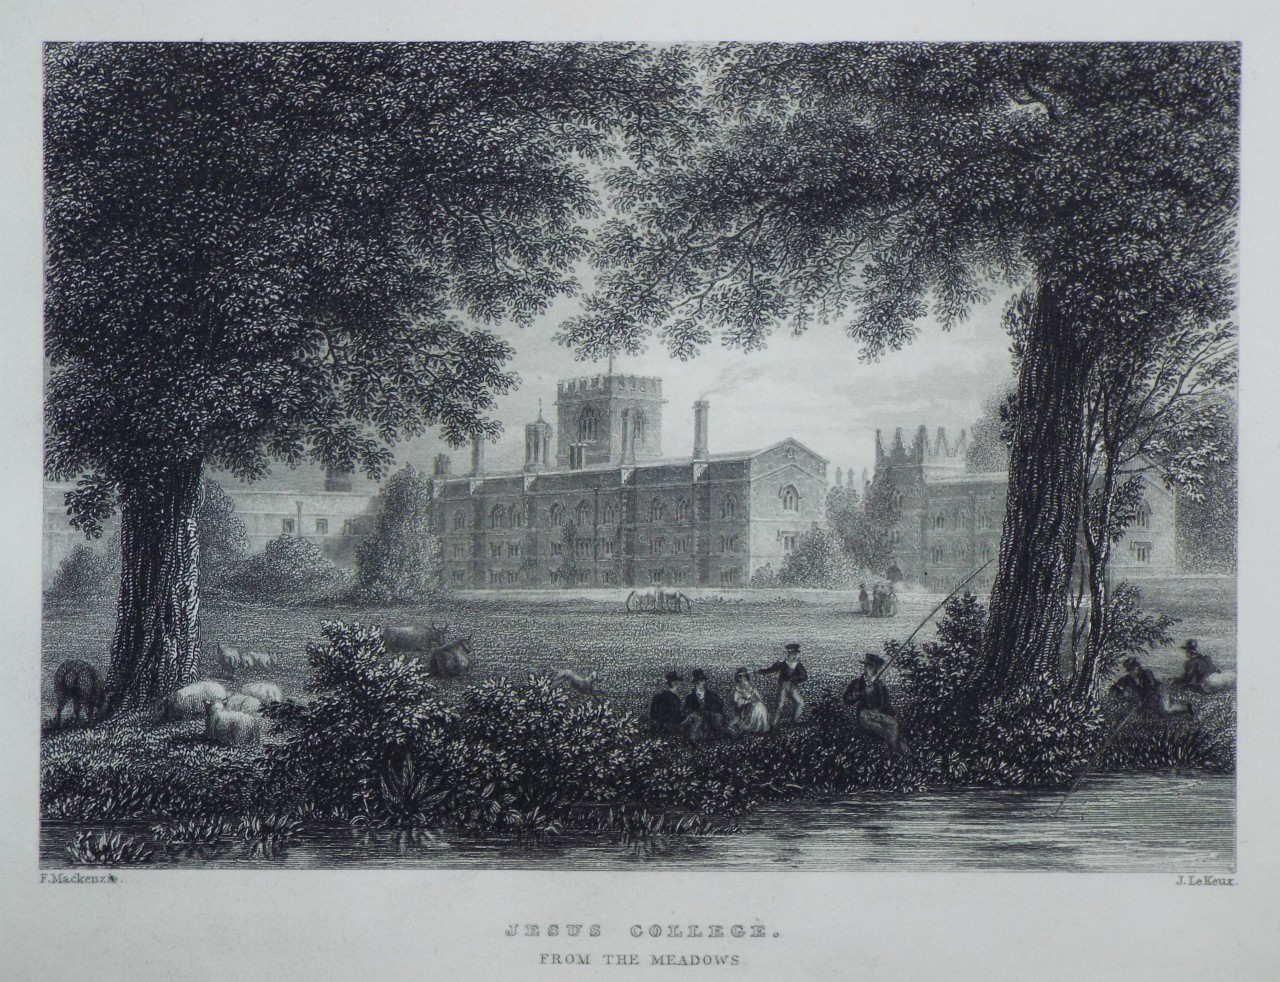 Print - Jesus College. From the Meadows - Le